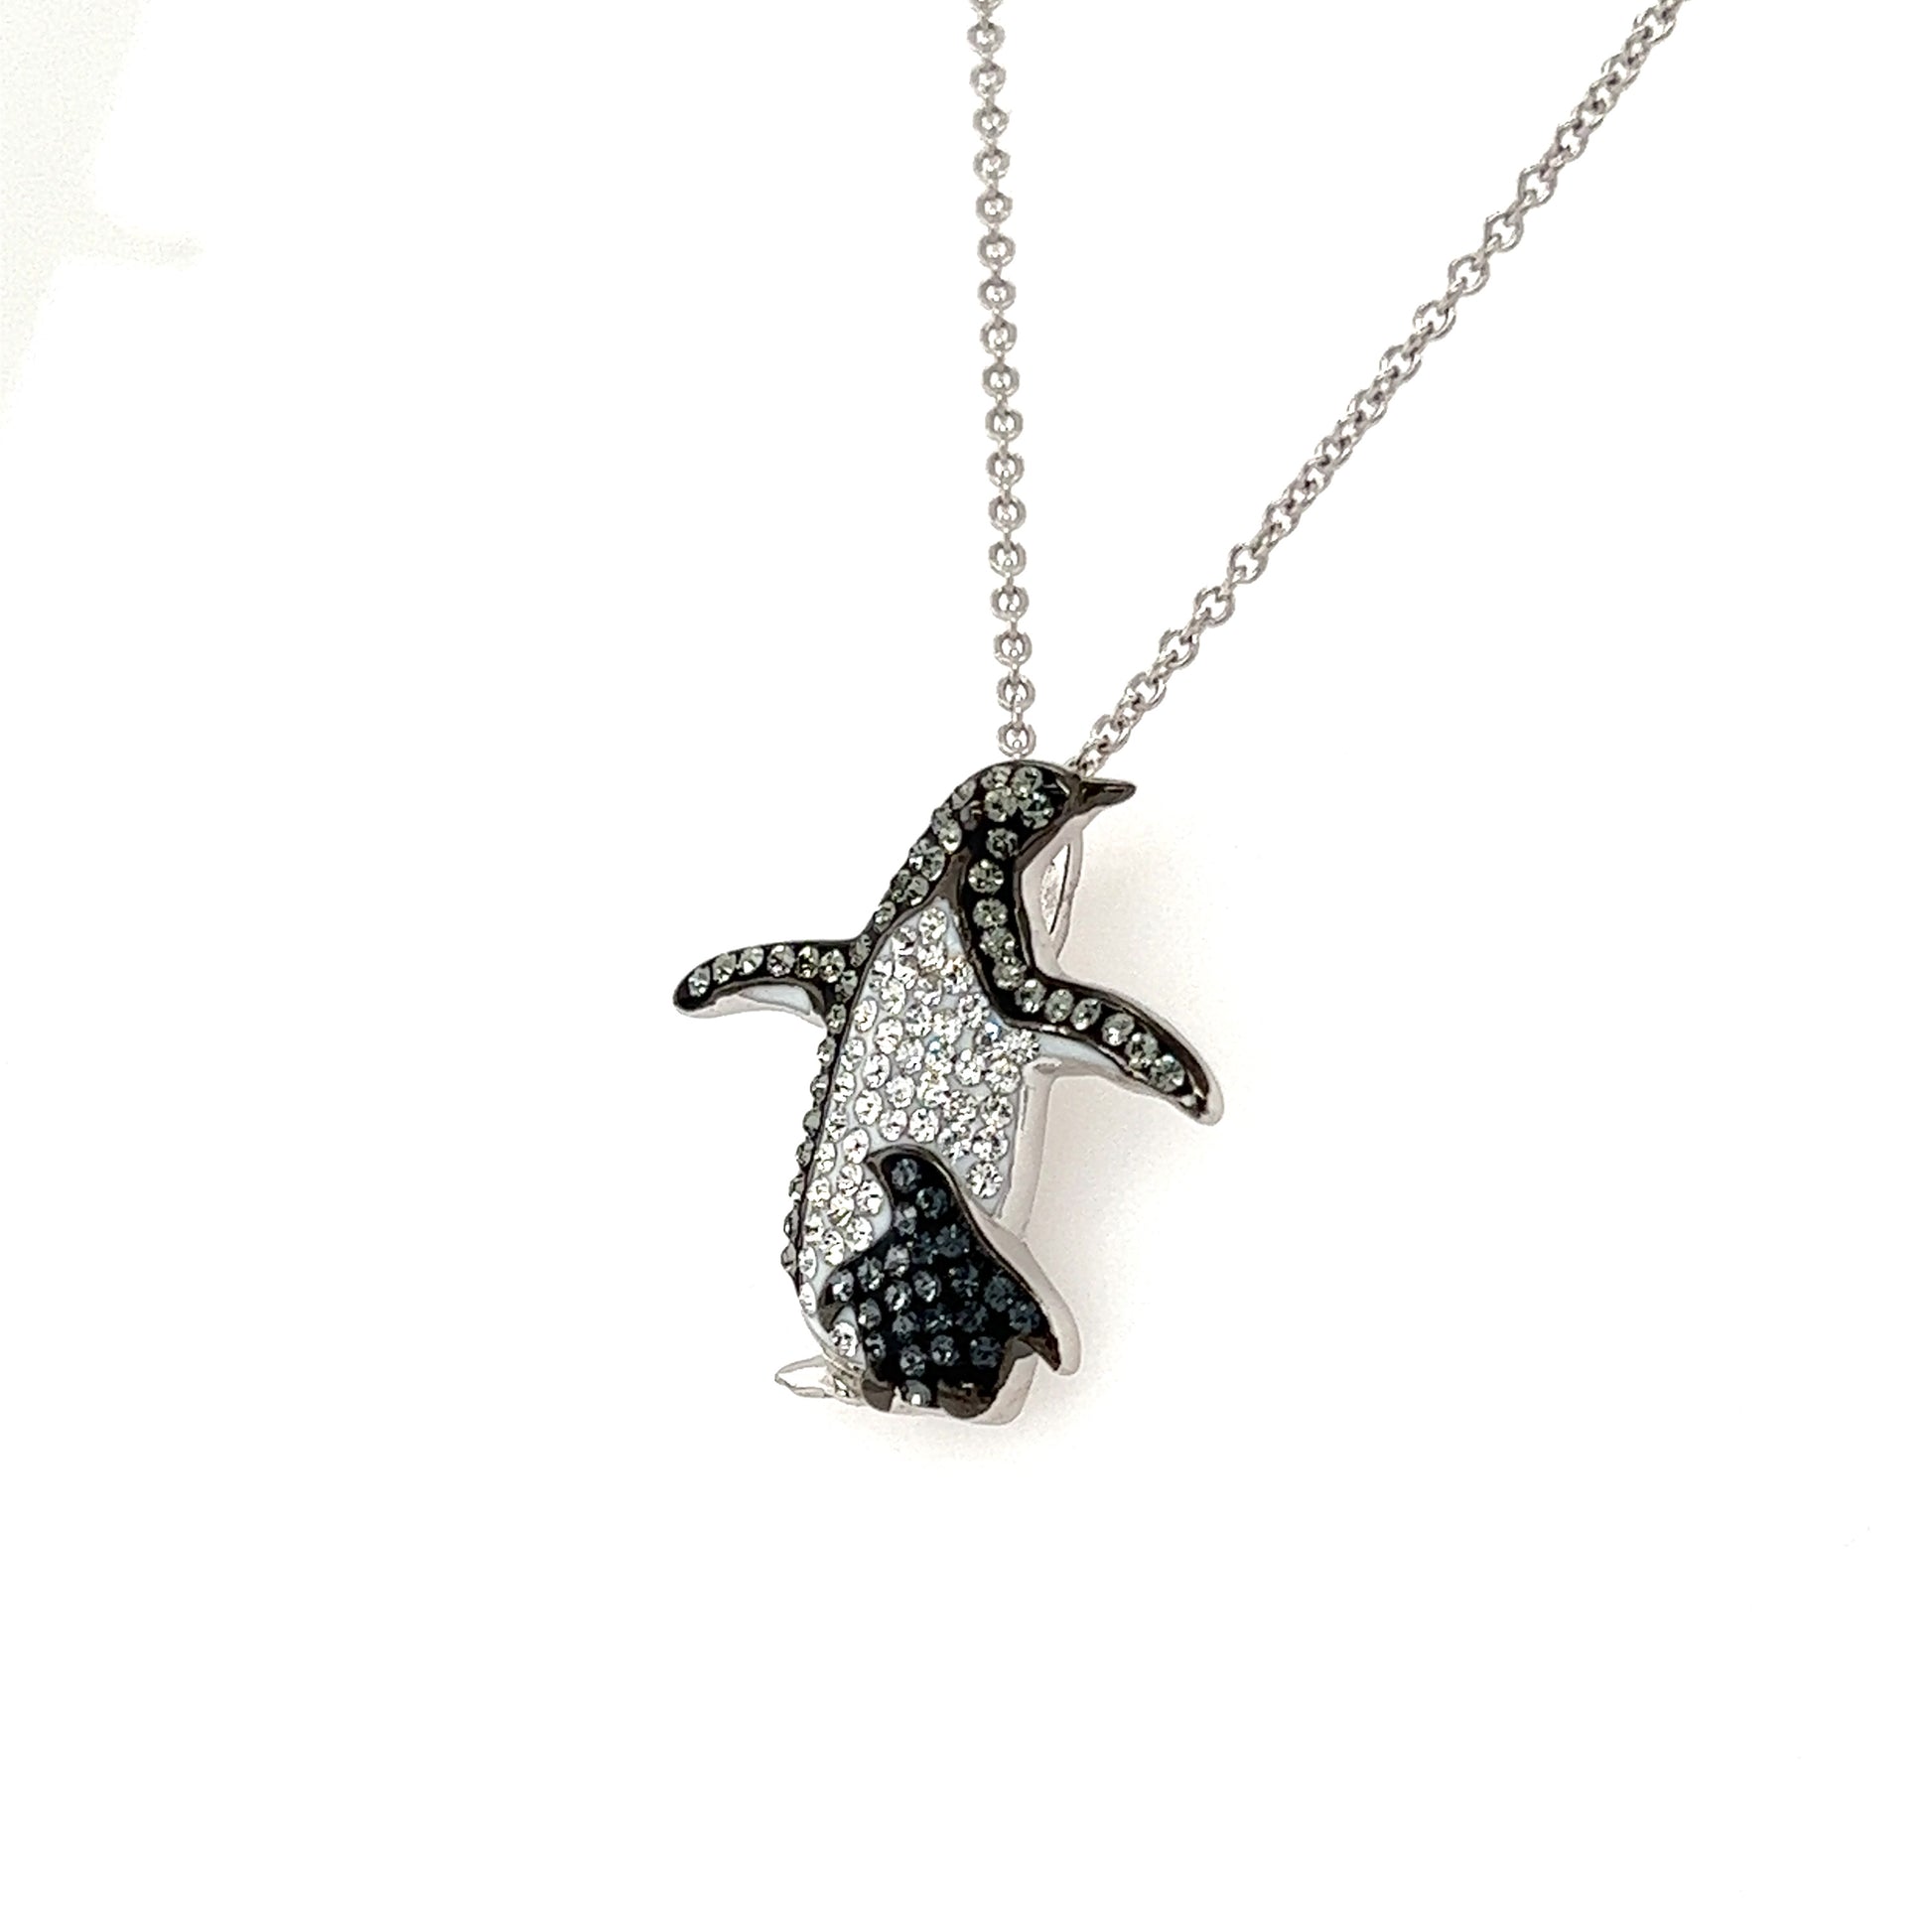 Penguin and Baby Necklace with Crystals in Sterling Silver Right Side View